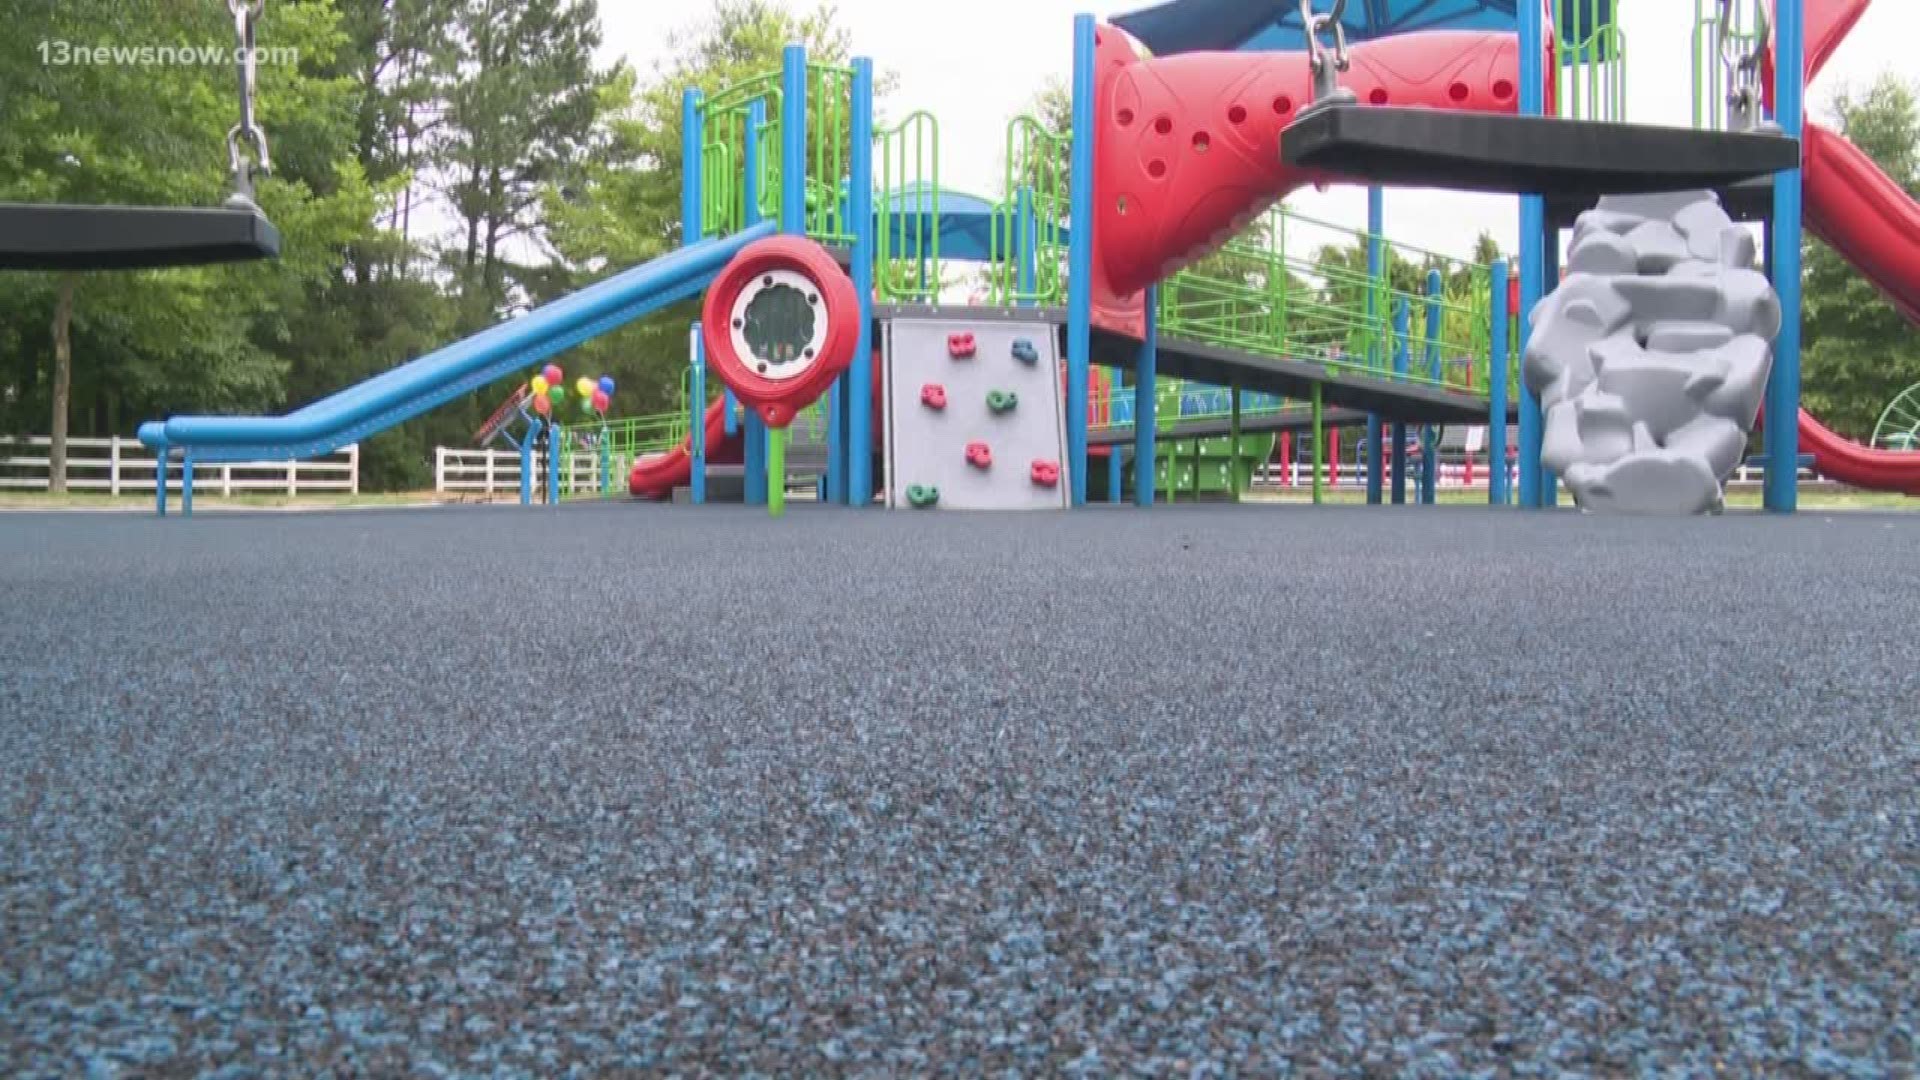 The playground at Lake Meade Park is designed to serve the physical, social and sensory needs of all children.